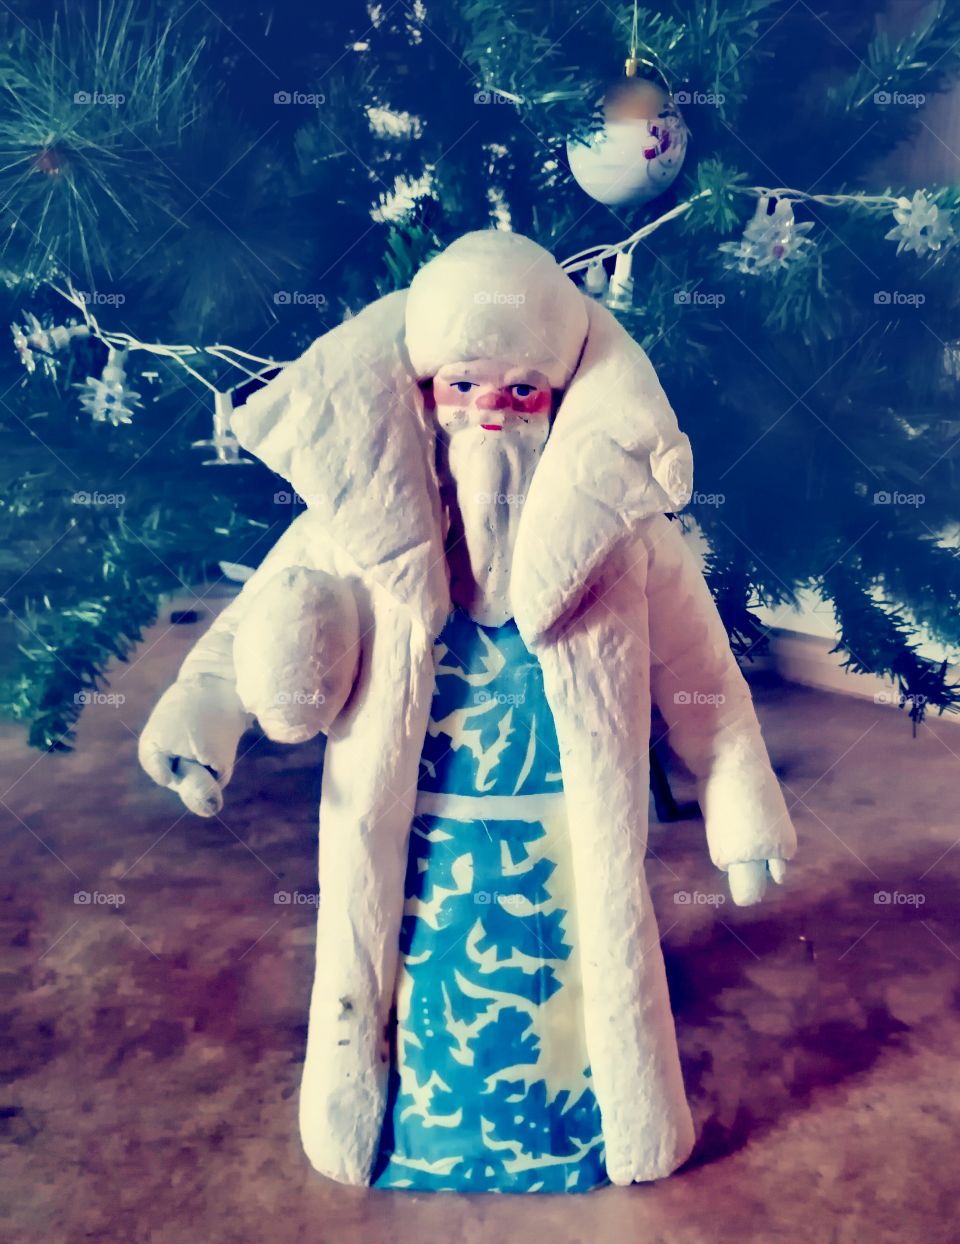 Our grandfather Frost is standing next to the tree.